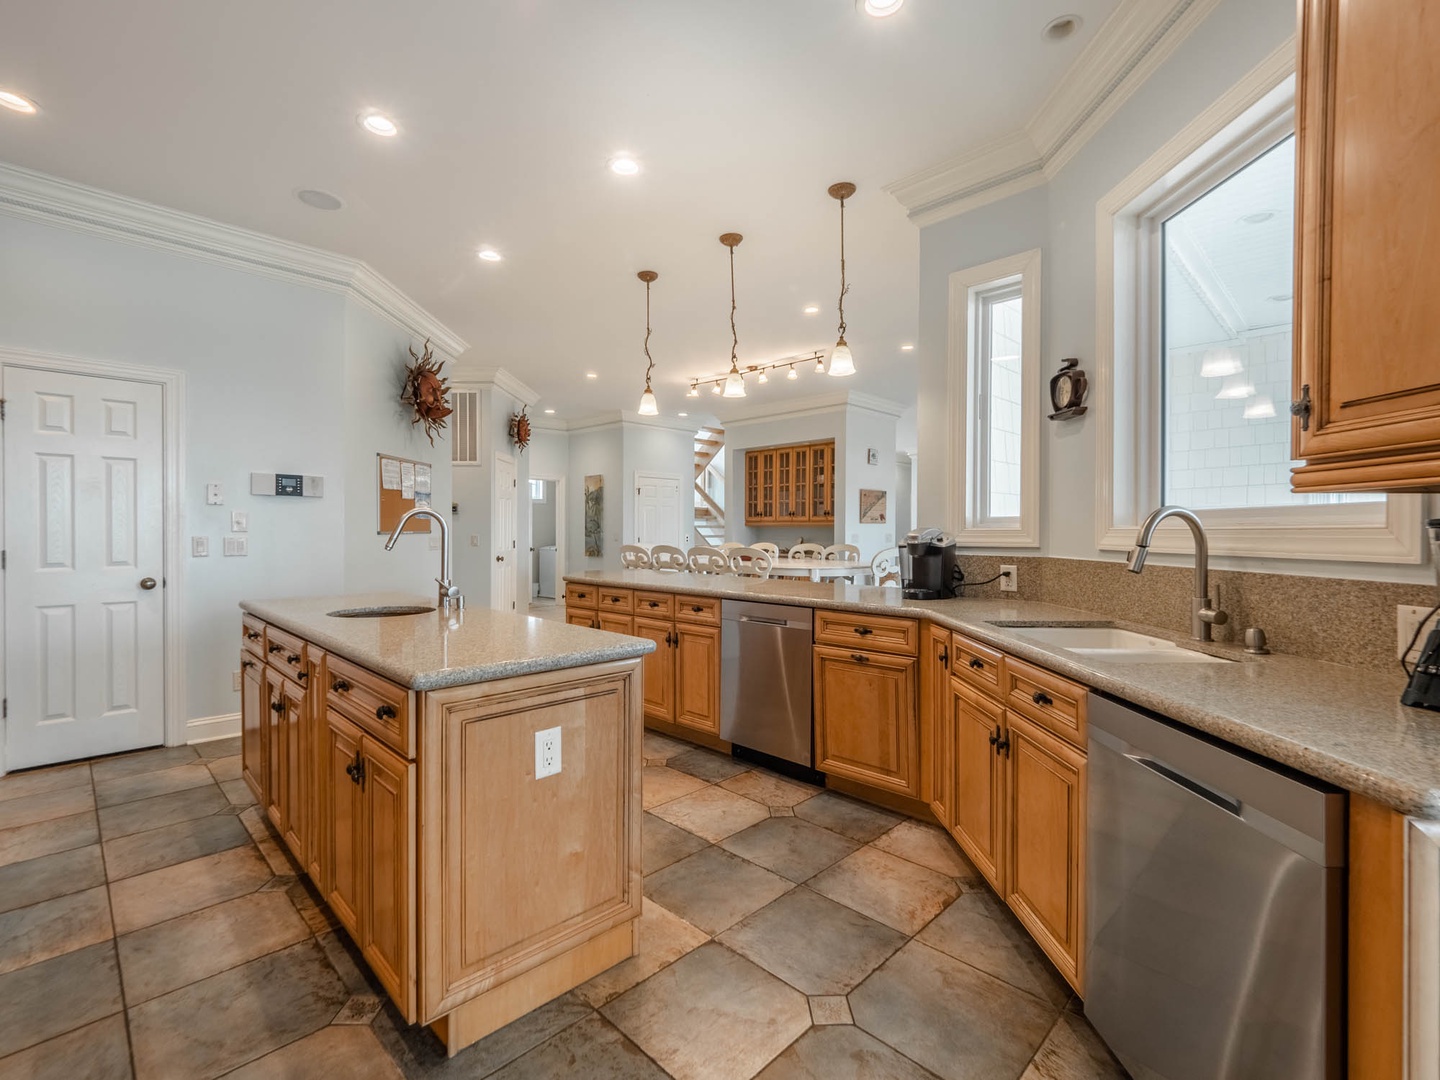 The spacious kitchen with countertop seating for 6